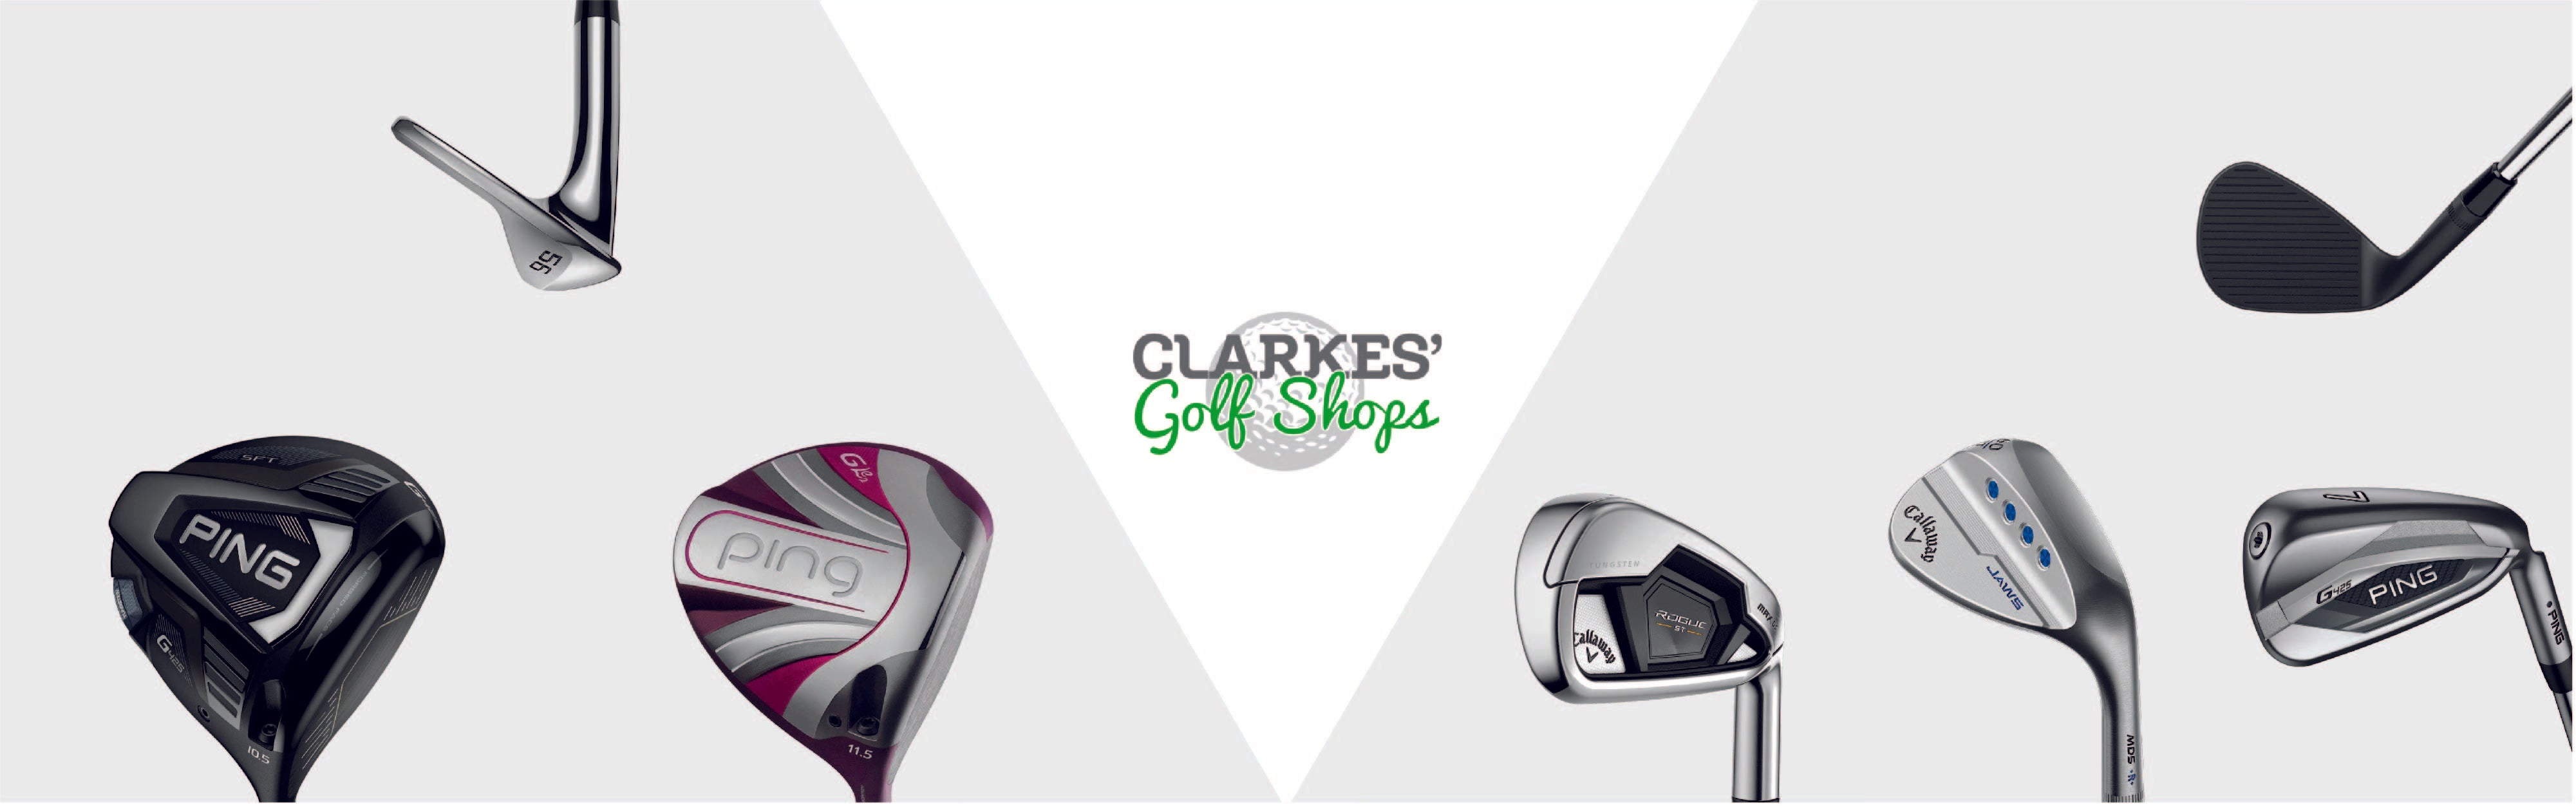 How To Choose The Right Club When You’re On The Course - Clarkes